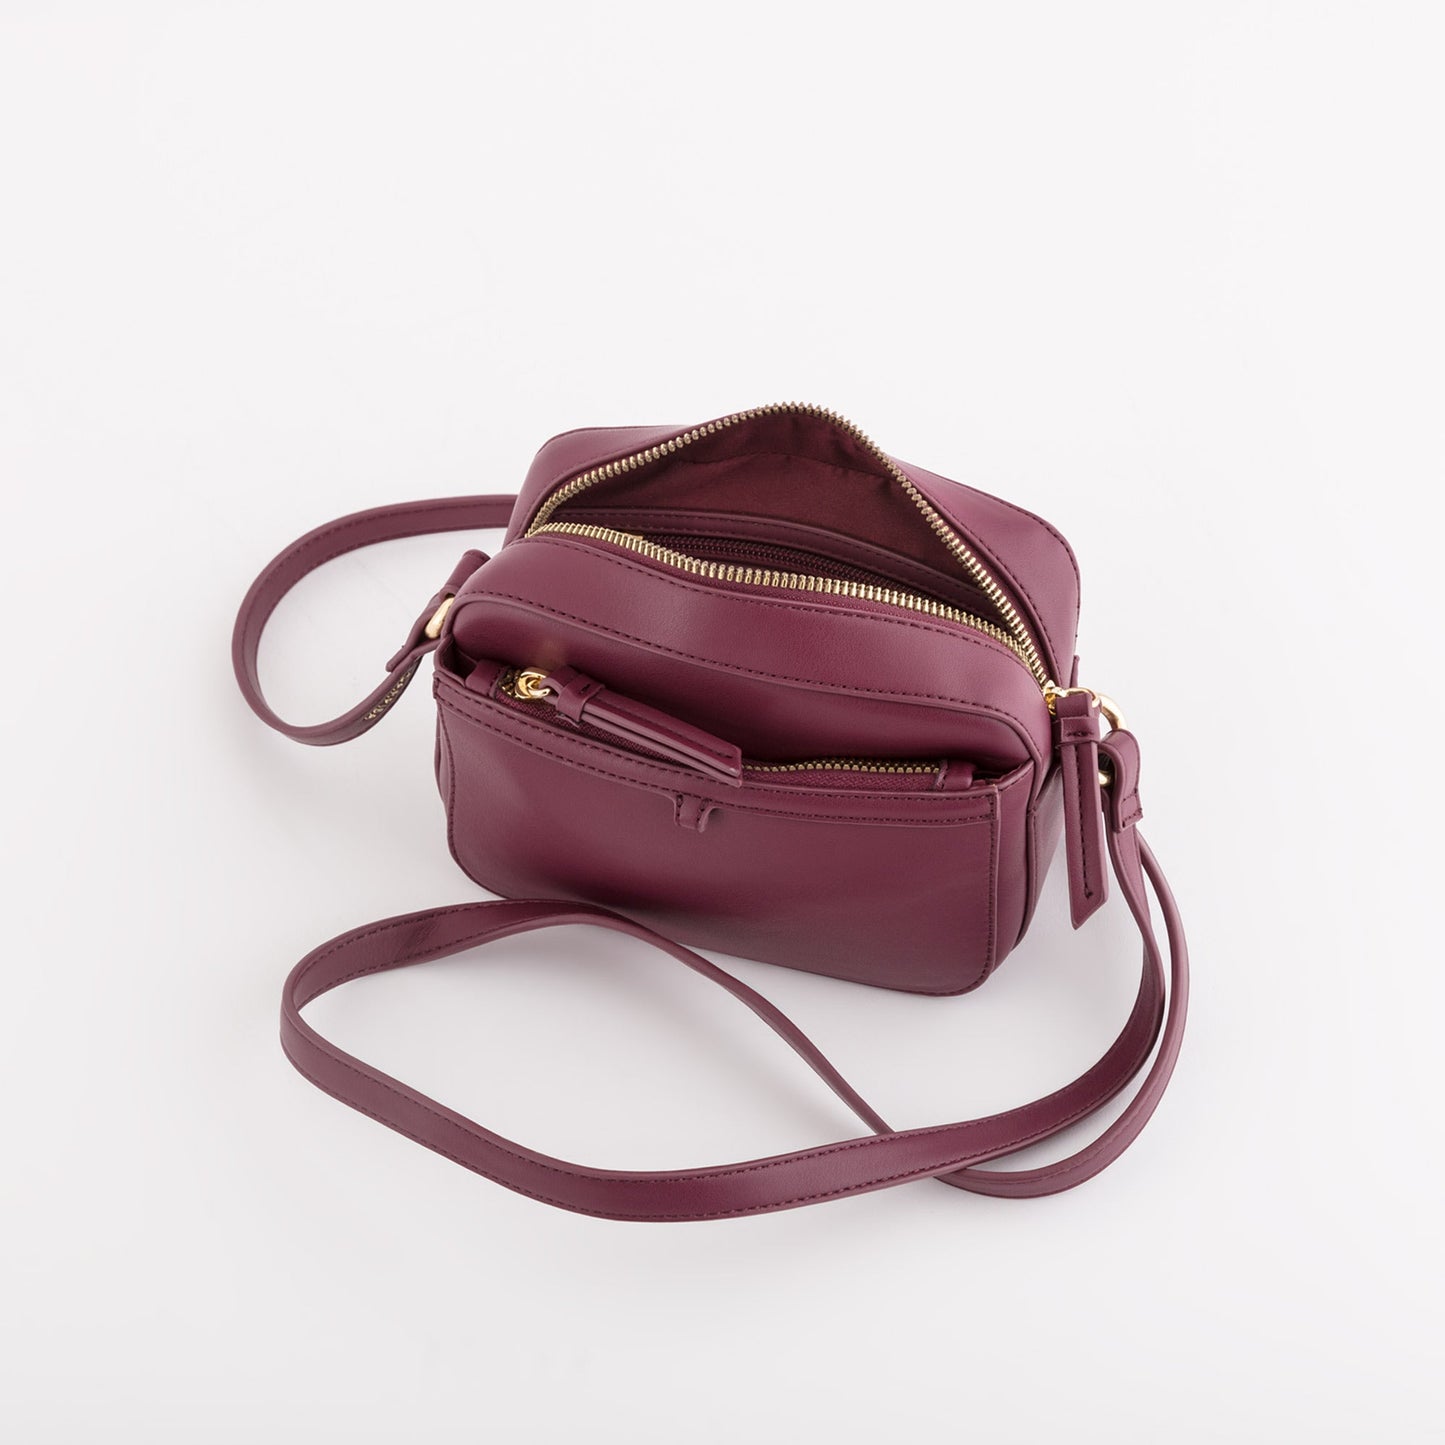 Lucy Winter Bags - Woman